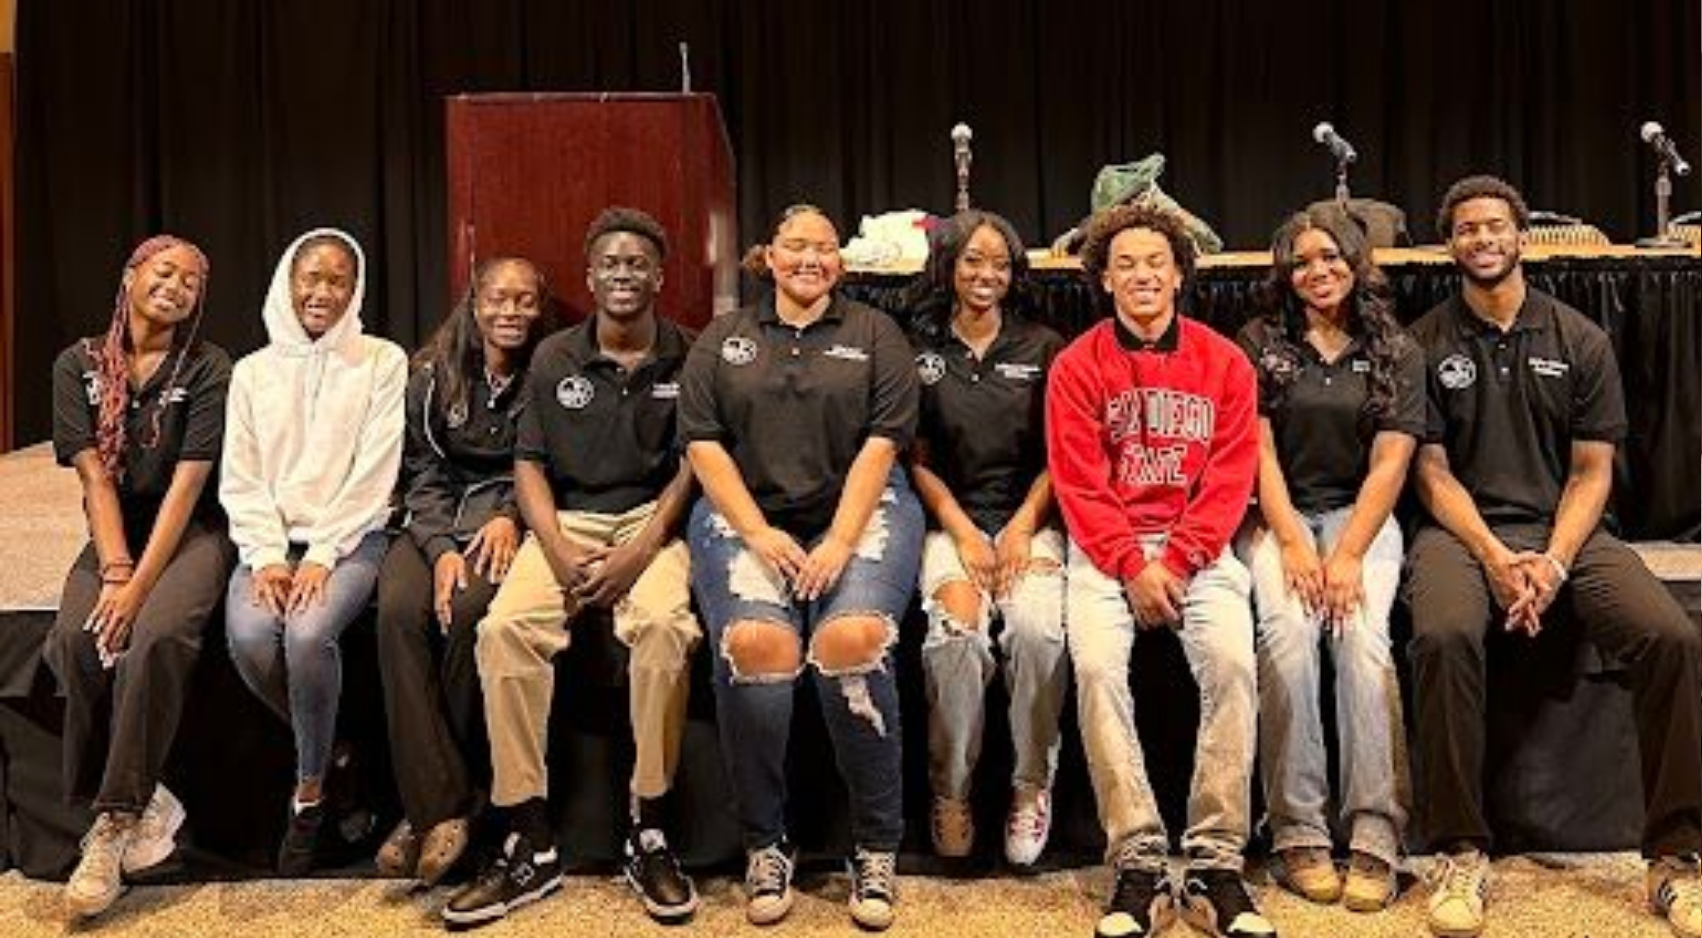 The 48th Annual High School Conference hosted by SDSU's African Student Union held workshops, campus tours, and panels for high school students invited to the campus. (Courtesy of SDSU ASU)